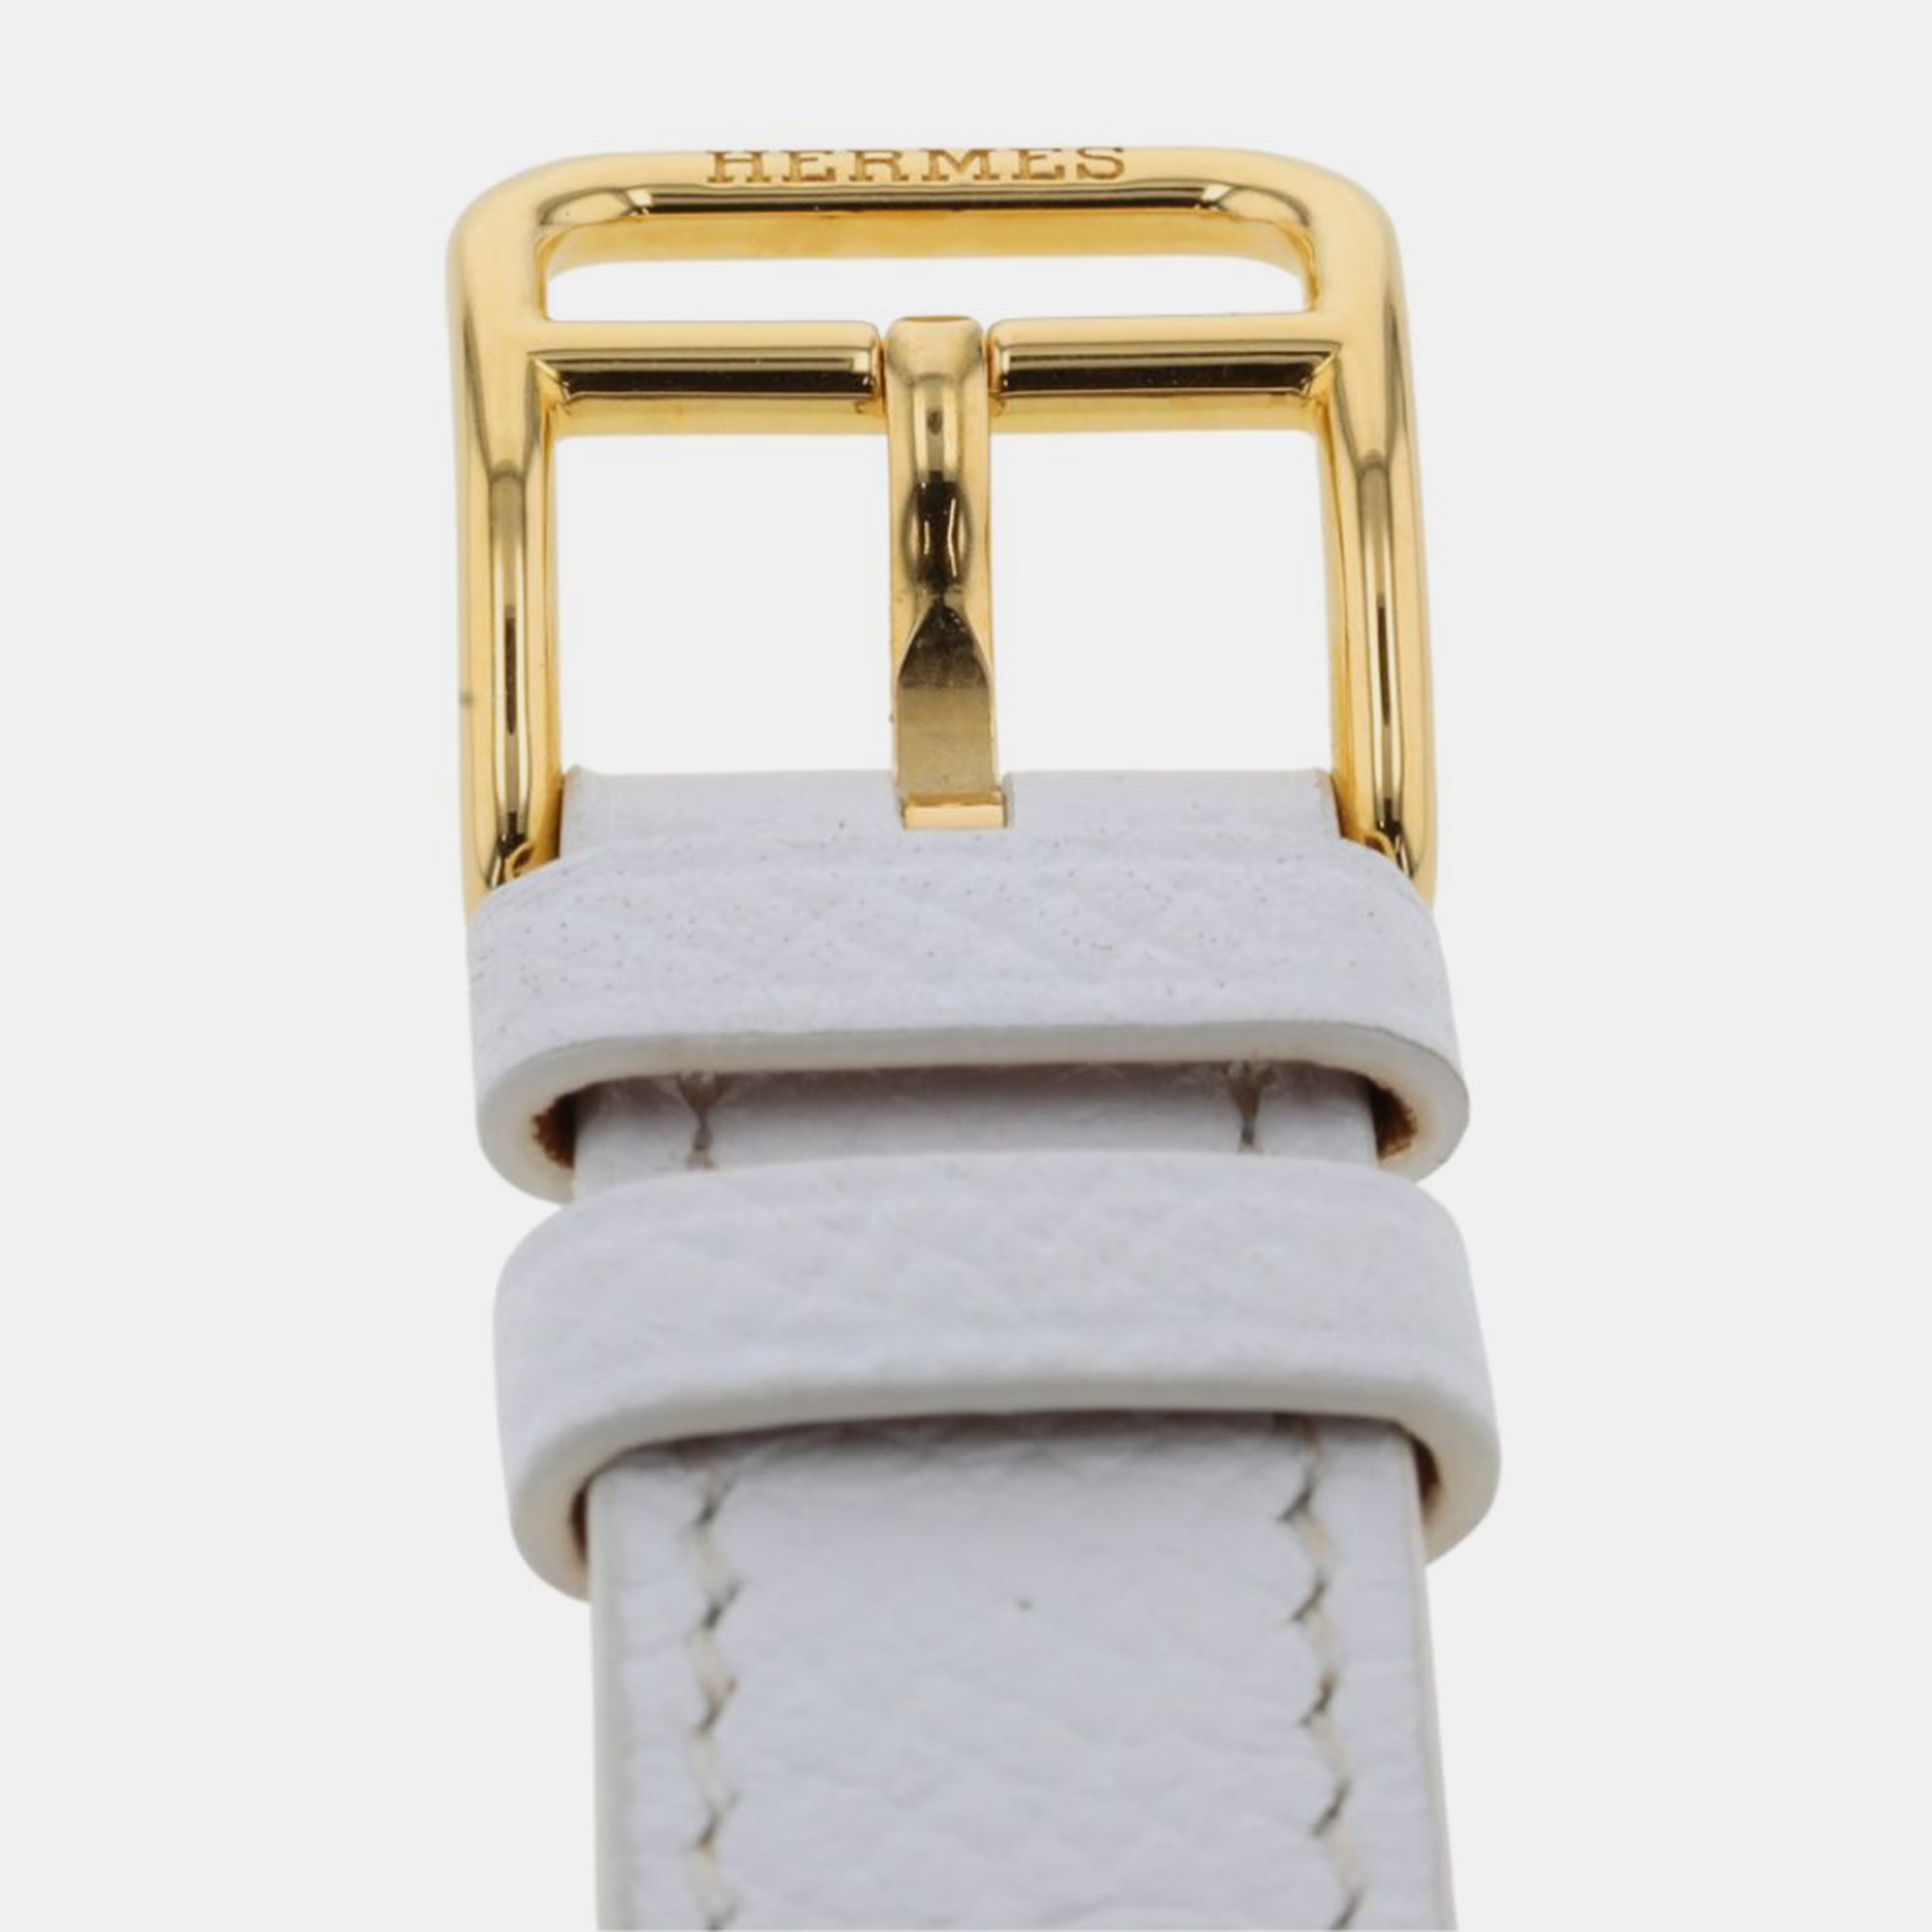 Hermes White 18k Yellow Gold Plated And Stainless Steel Heure H HH1.201 Quartz Women's Wristwatch 24.5 Mm